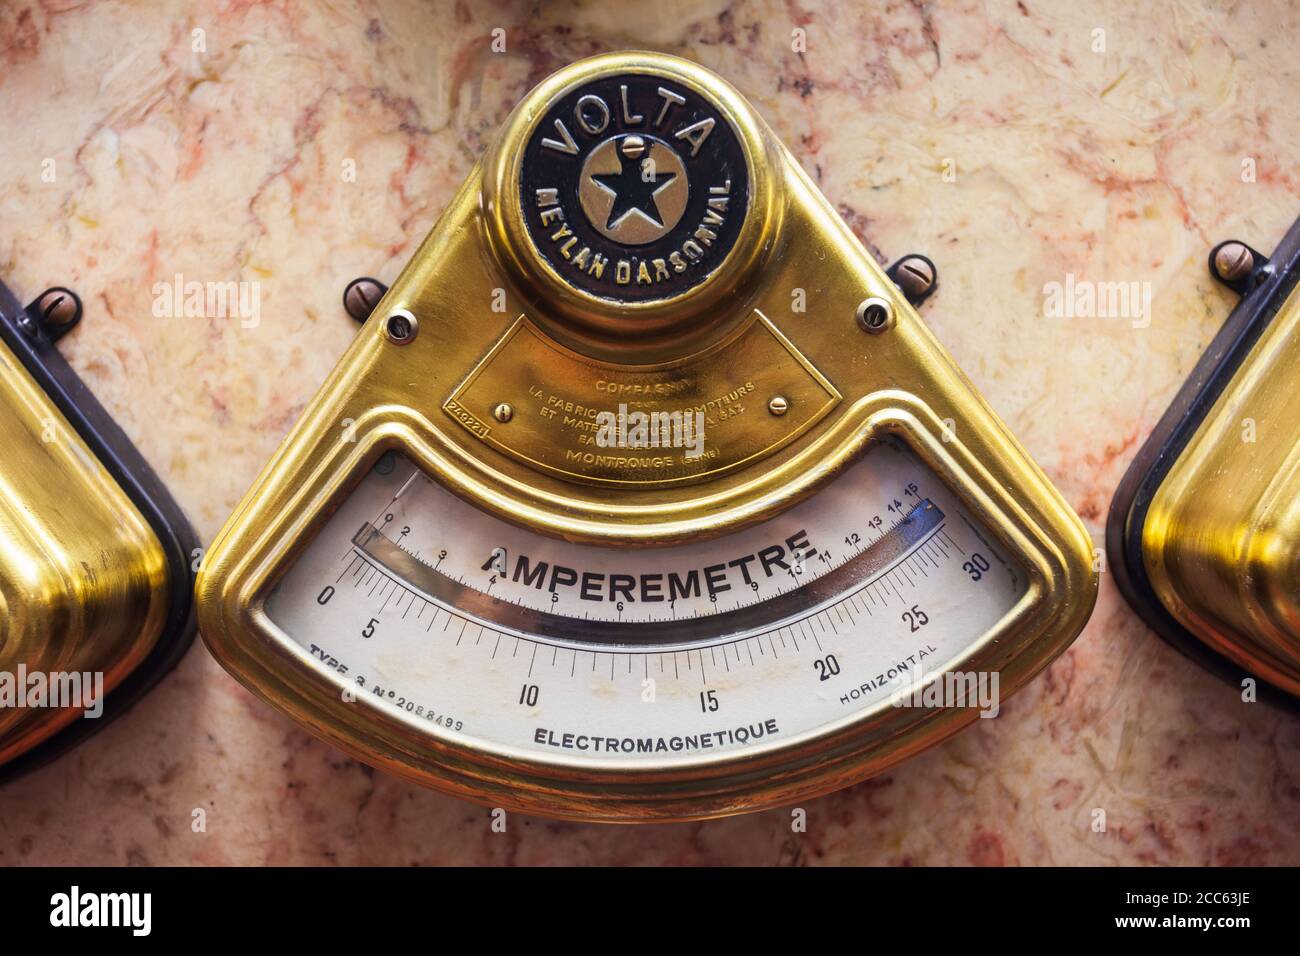 LISBON, PORTUGAL - JUNE 25, 2014:Vintage retro ammeter or ammeter device at the Tejo Power Station Electricity Museum in Lisbon city, Portugal Stock Photo